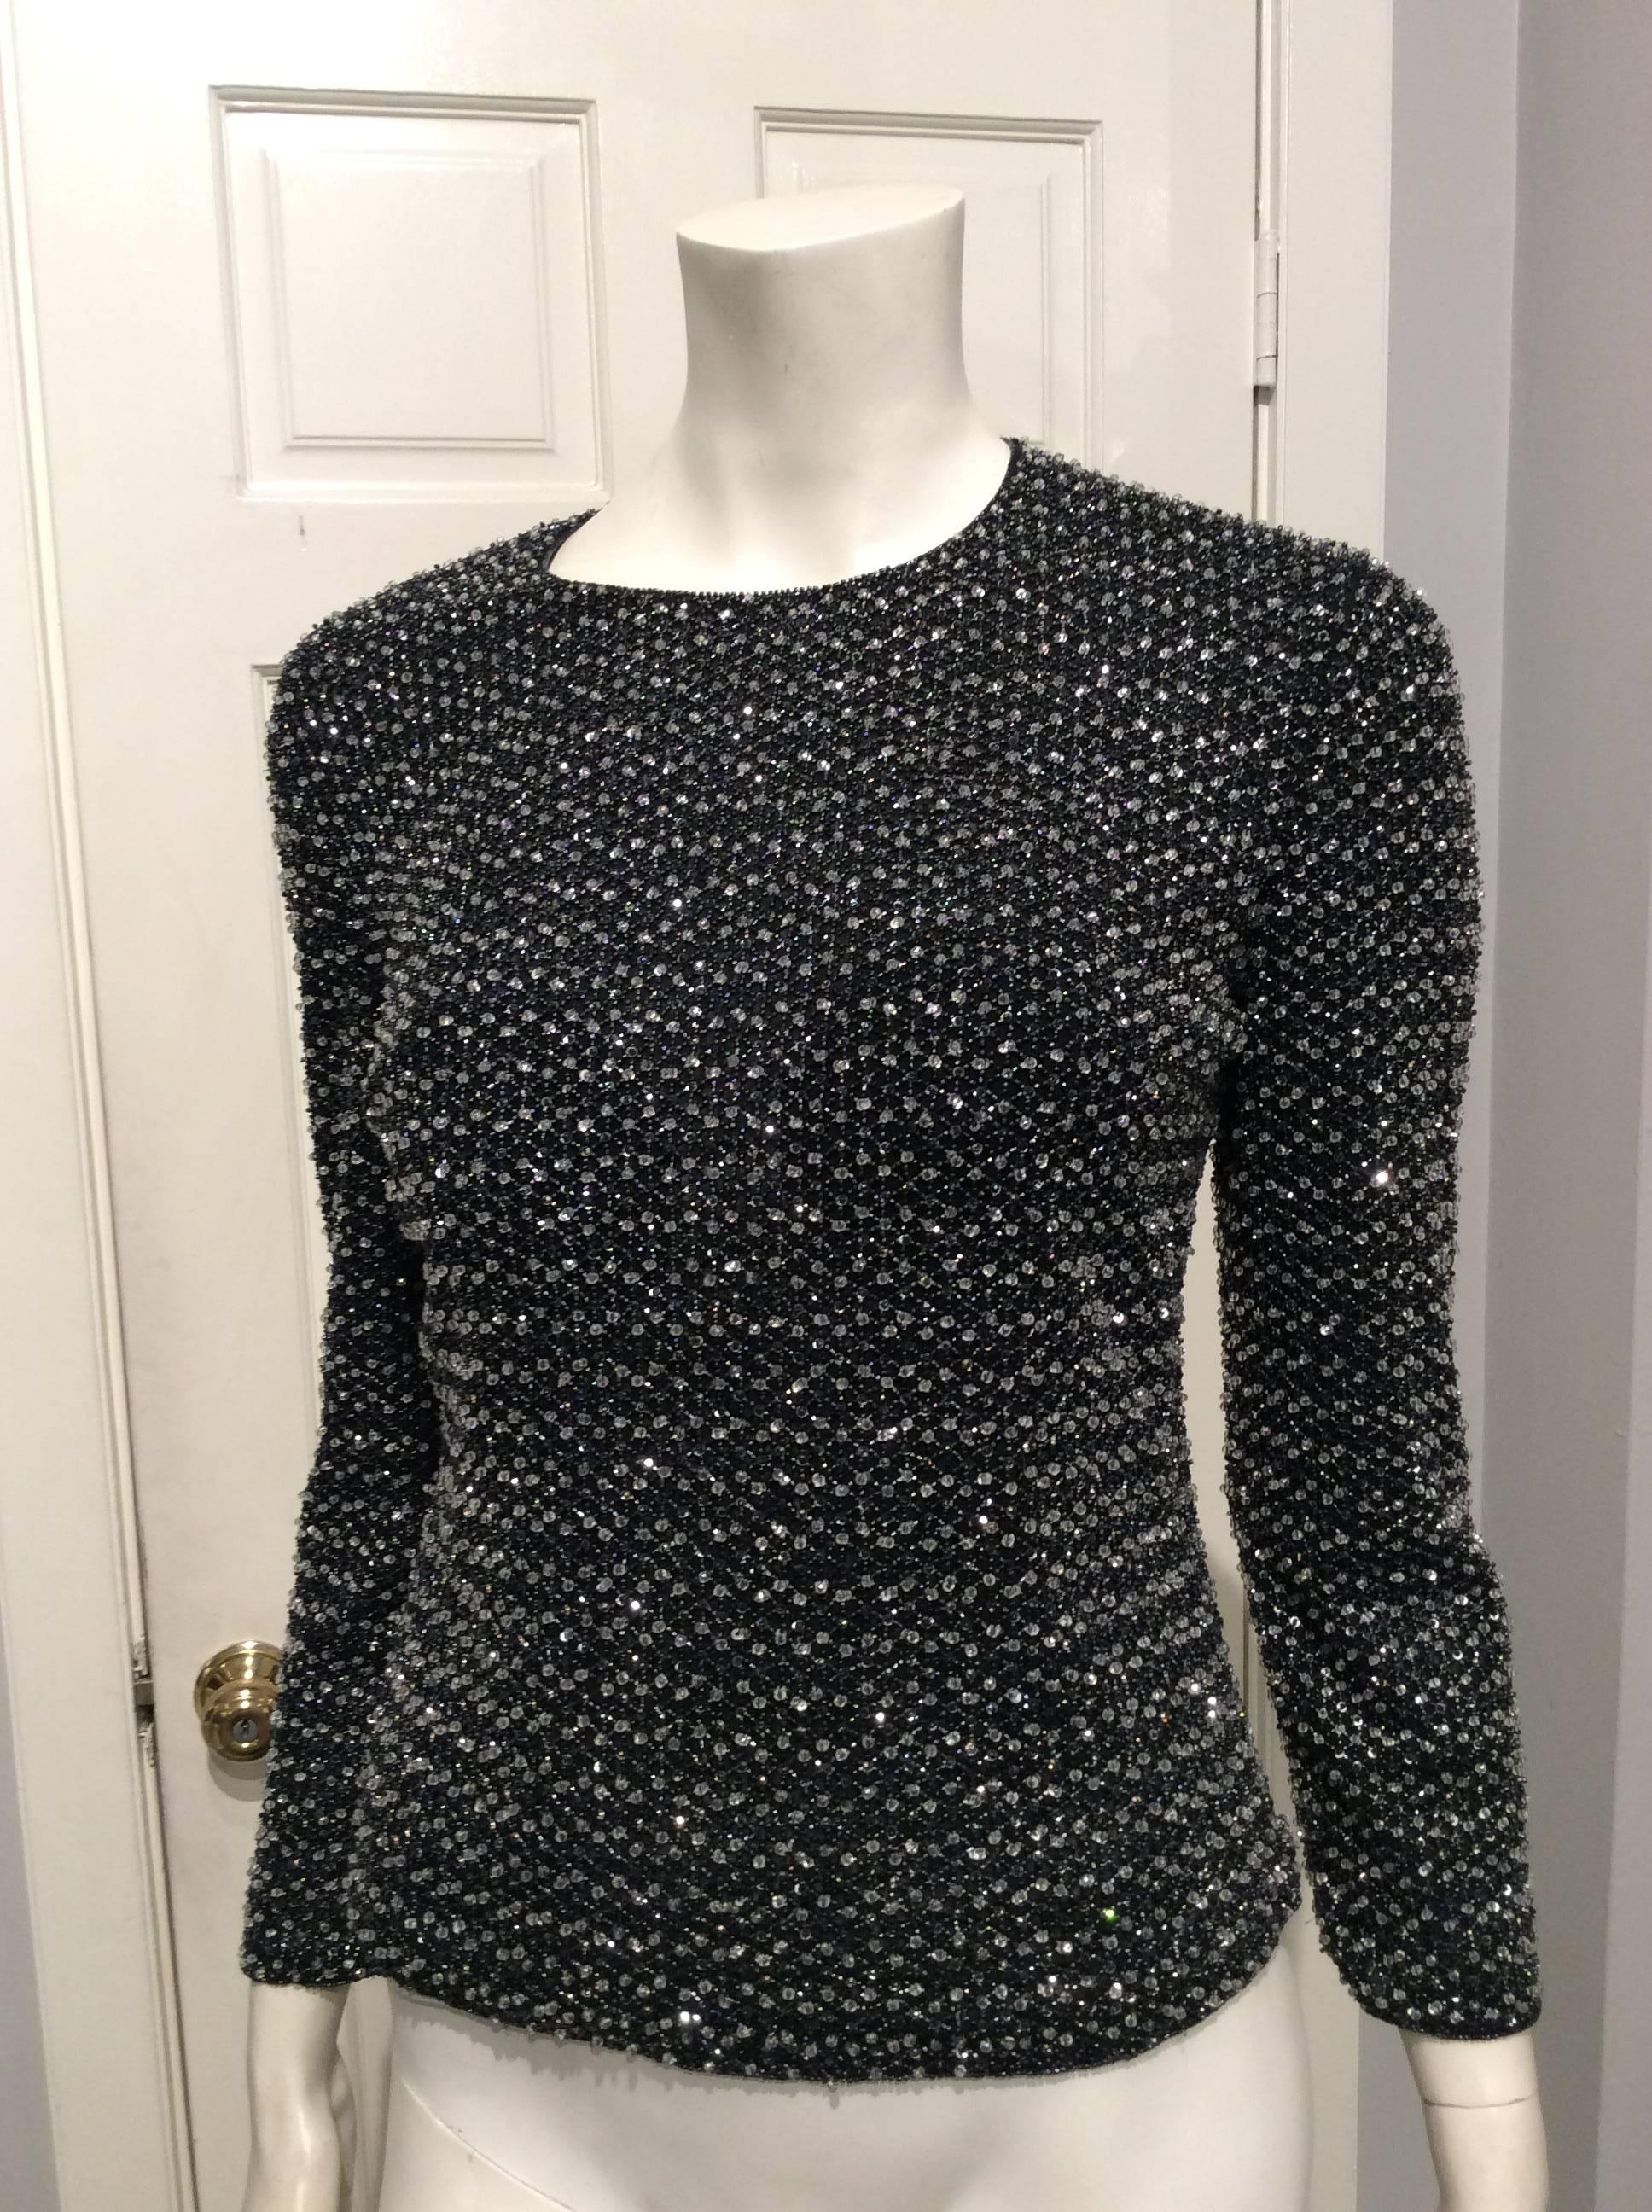 Giorgio Armani stunning long sleeve top in blue-black. Clear glass beads and smaller pewter ones form a honeycomb pattern that covers the front, the long sleeves and part of the sides. The back is open with corset like black sequin bands. 